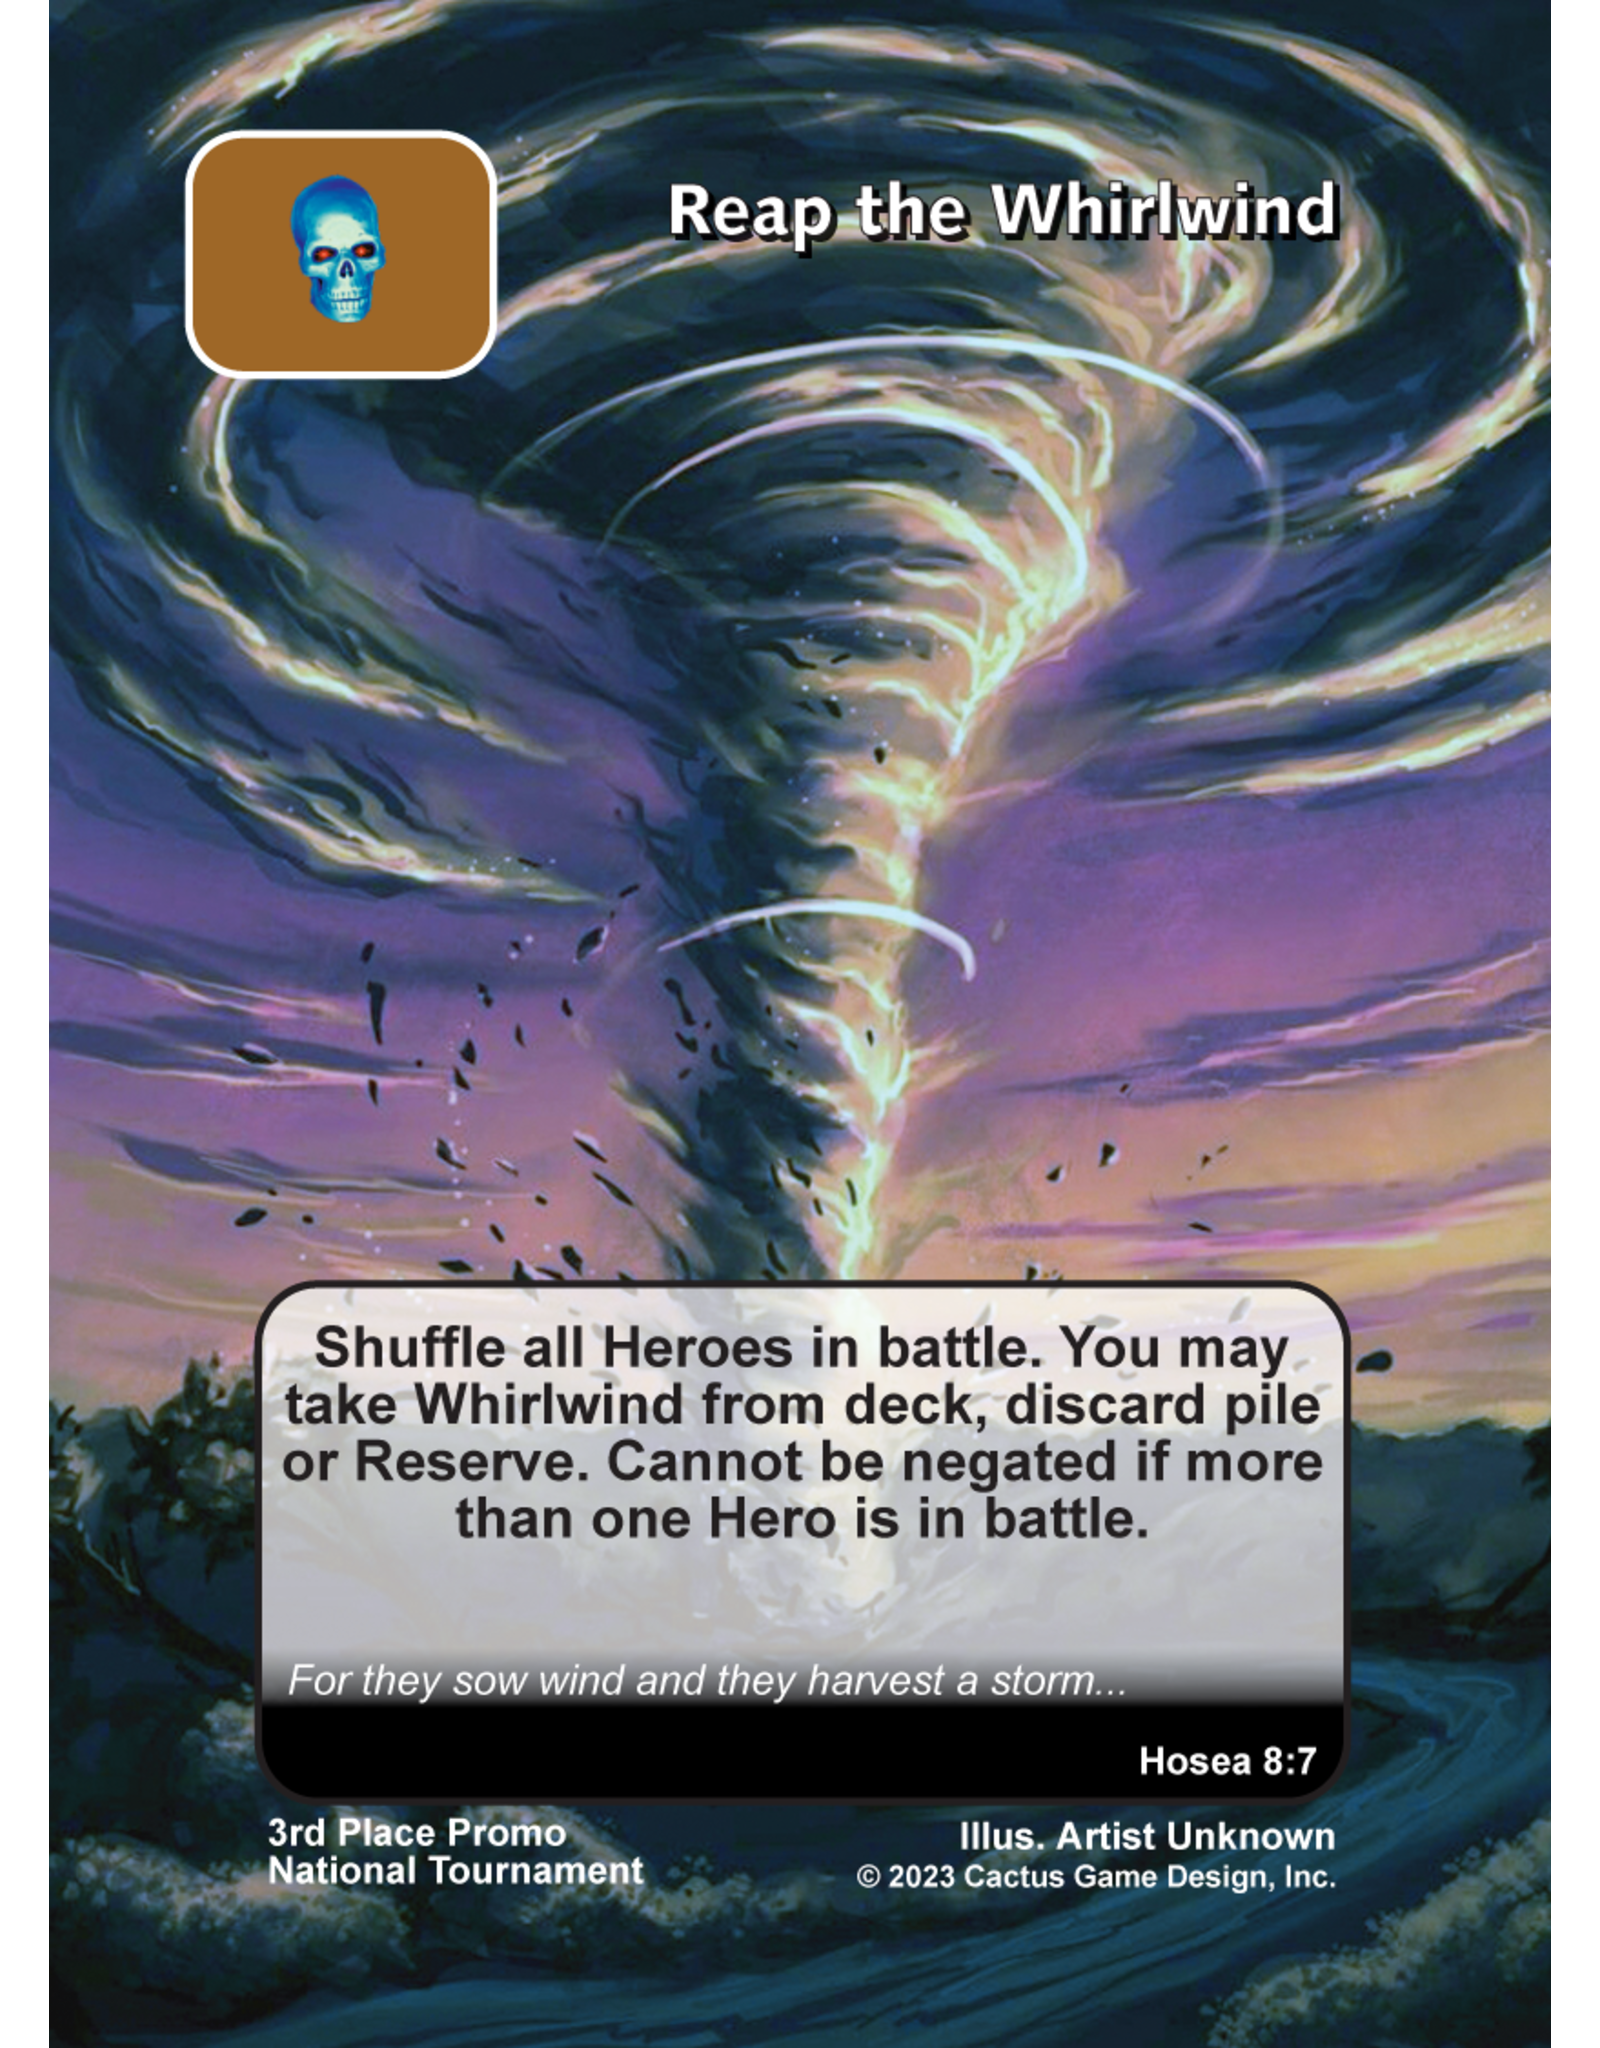 Promo: Reap the Whirlwind